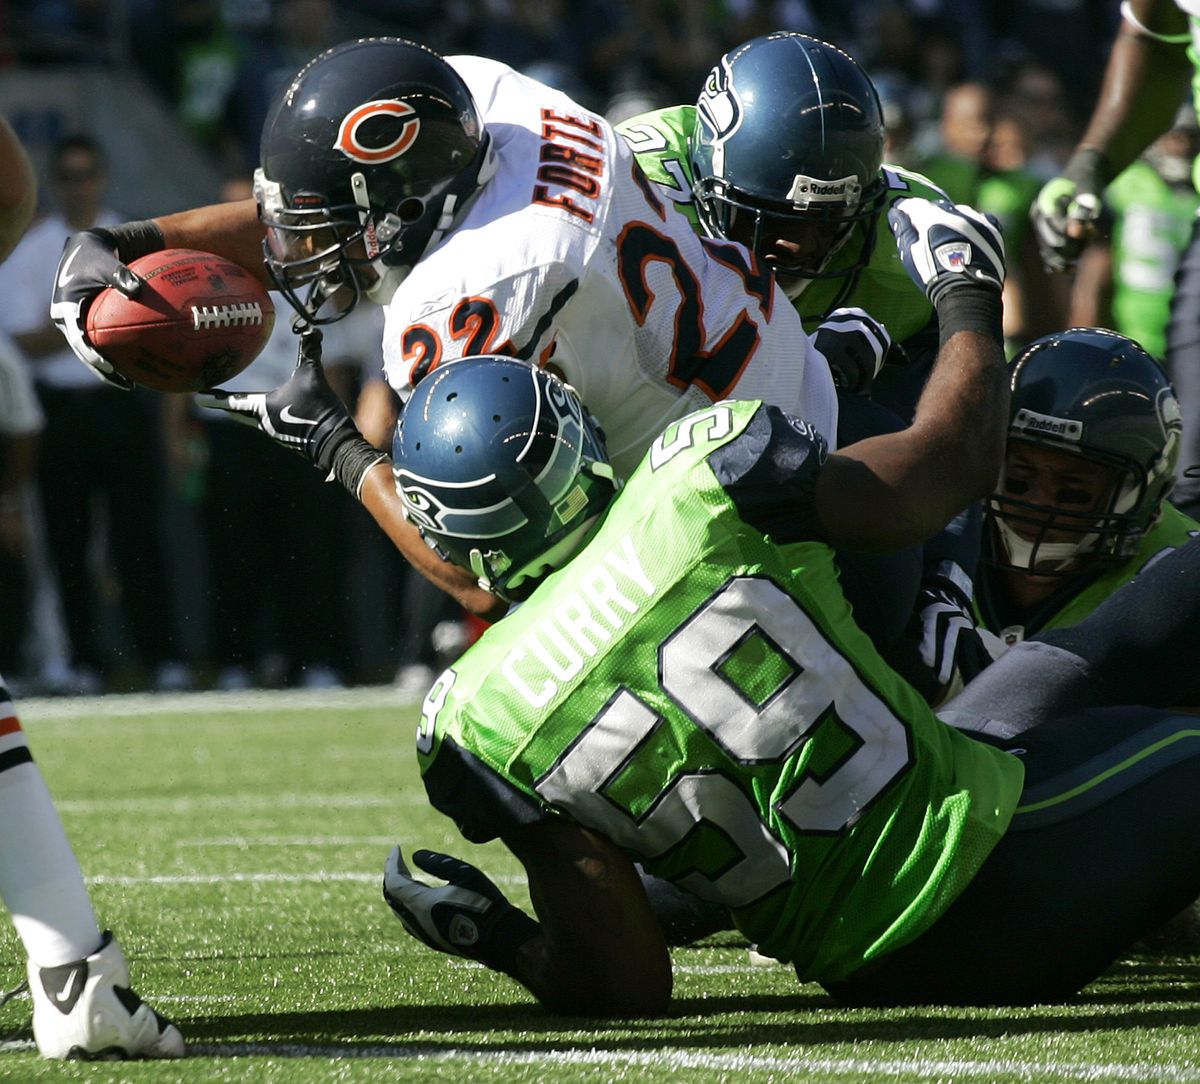 First called a fumble, Chicago’s Matt Forte is ruled down by contact on a play that led to Chicago’s first touchdown late in the second quarter. Associated Press photos (Associated Press photos / The Spokesman-Review)